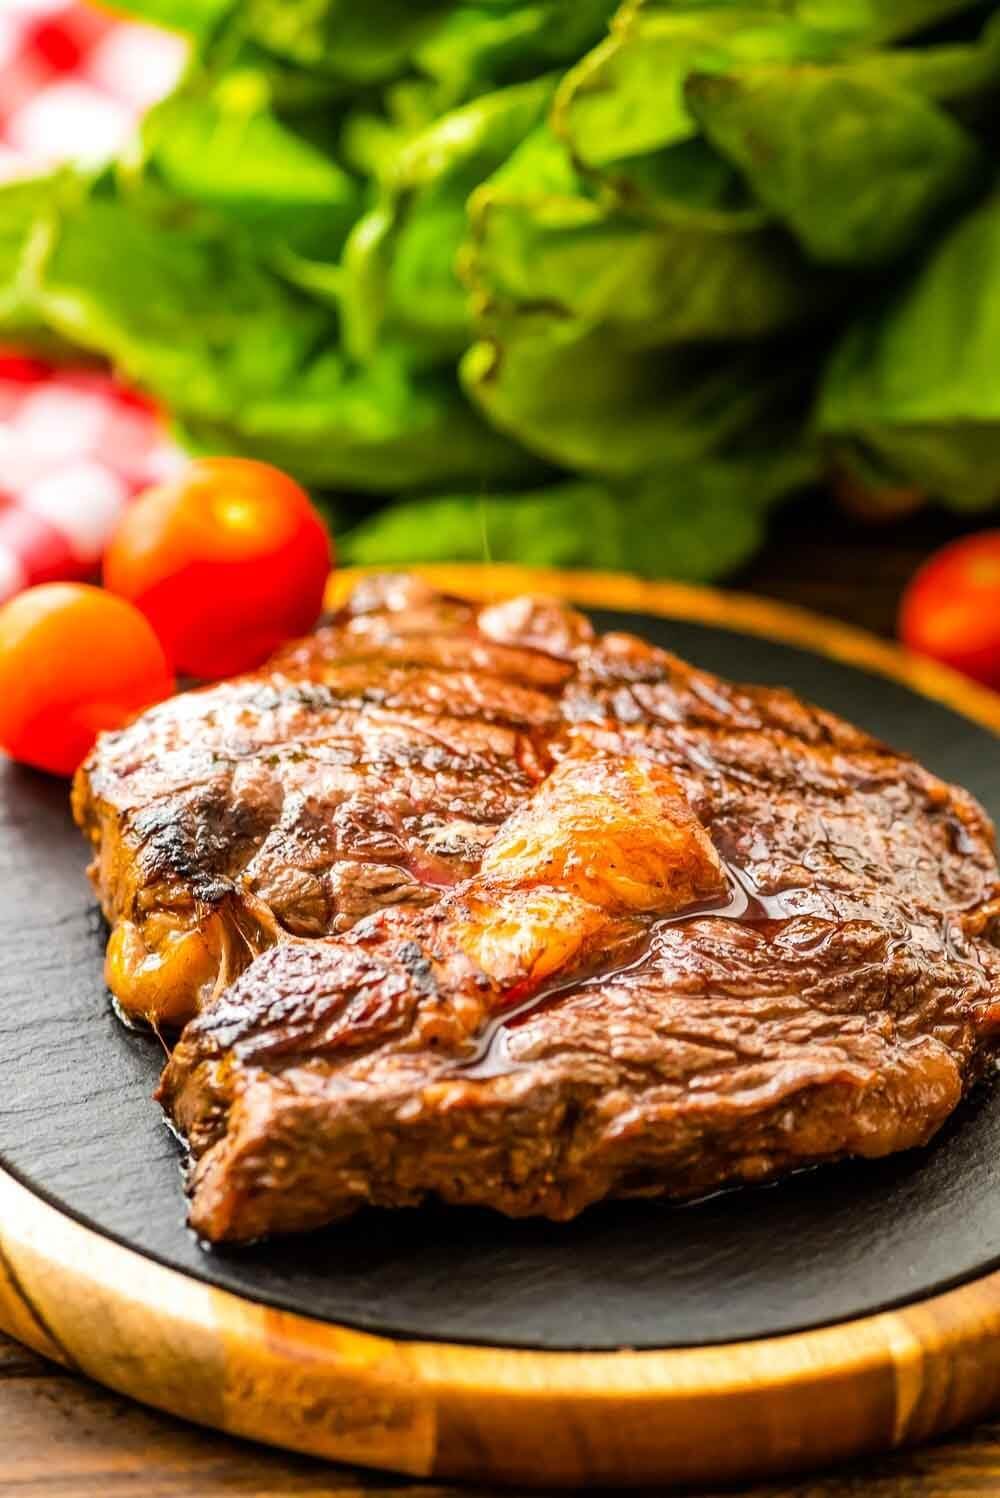 Red wine and steak is a classic combination and now you can incorporate that amazing flavoring in your marinade!